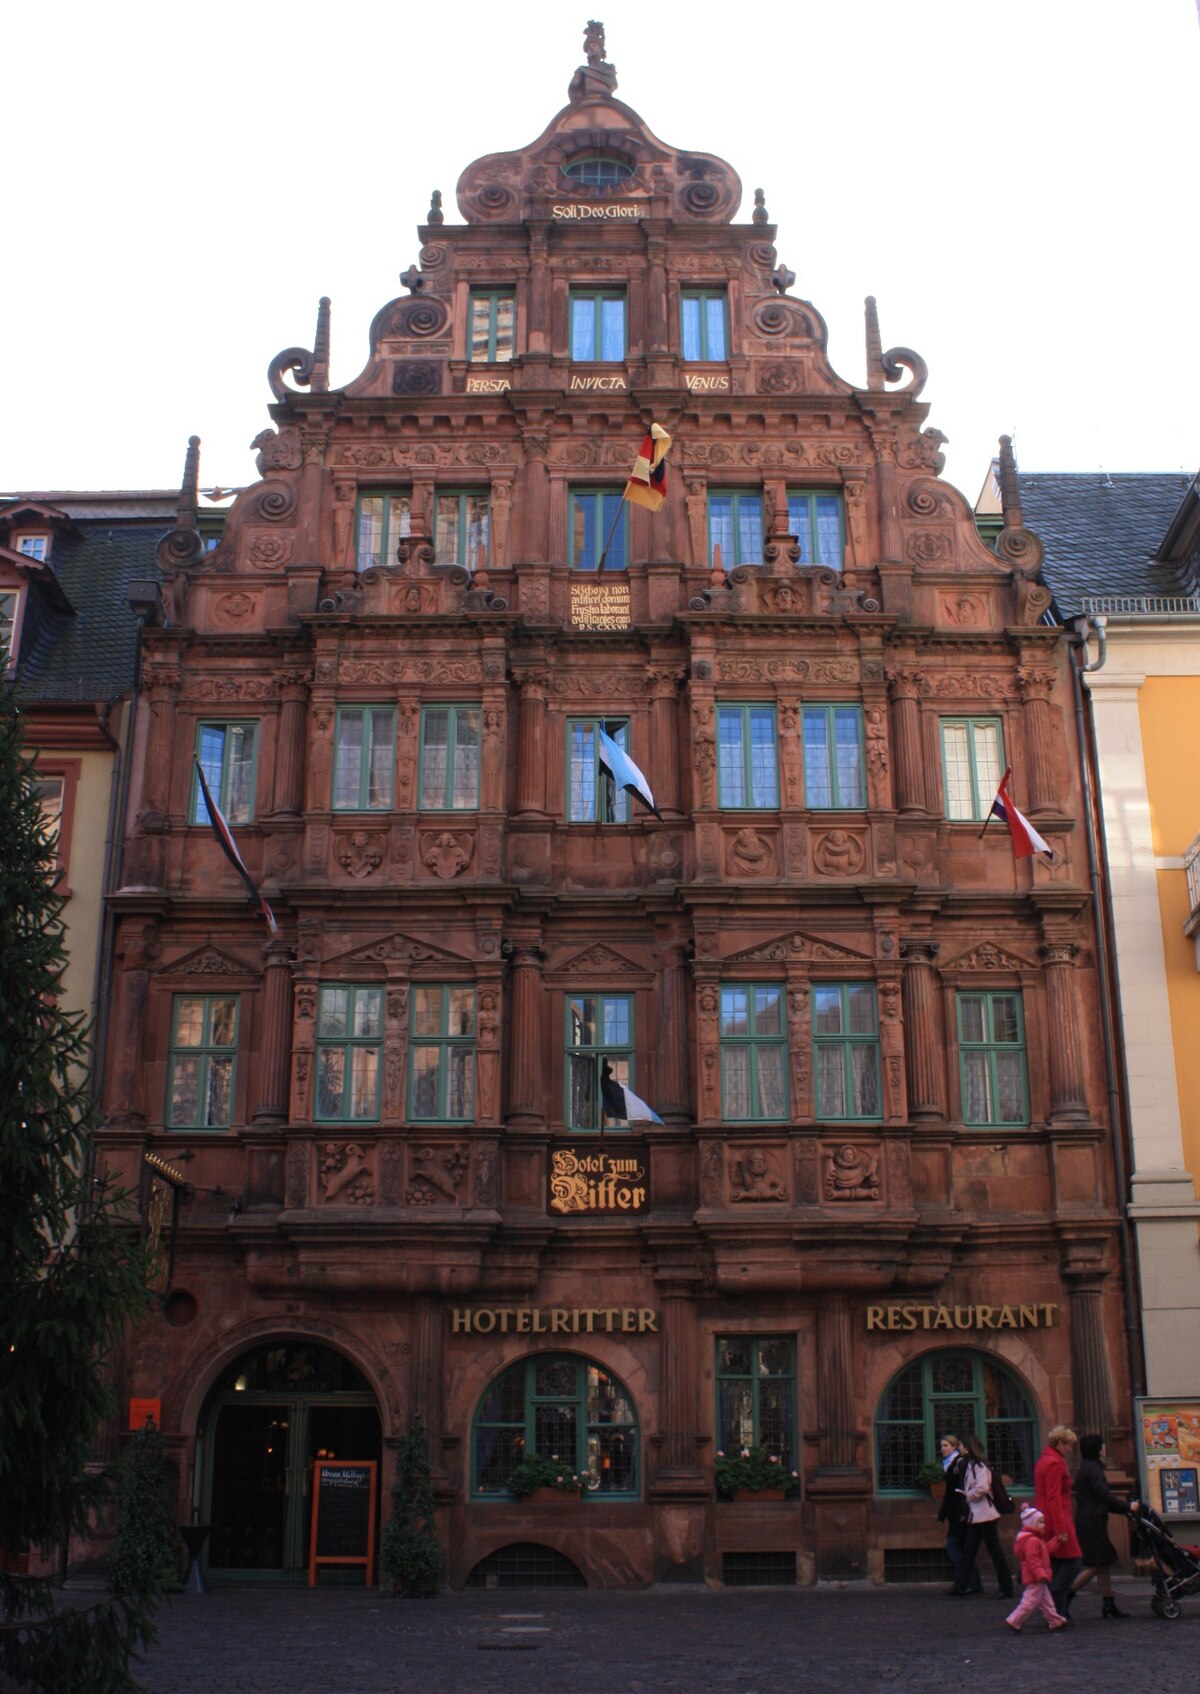 46+ elegant Fotos Haus Heidelberg / File Heidelberg Haus Zum Ritter Jpg Wikimedia Commons : I think every high school german student has taken a trip to heidelberg haus (more commonly known, i'd say, as cafe heidelberg) at one point or another.